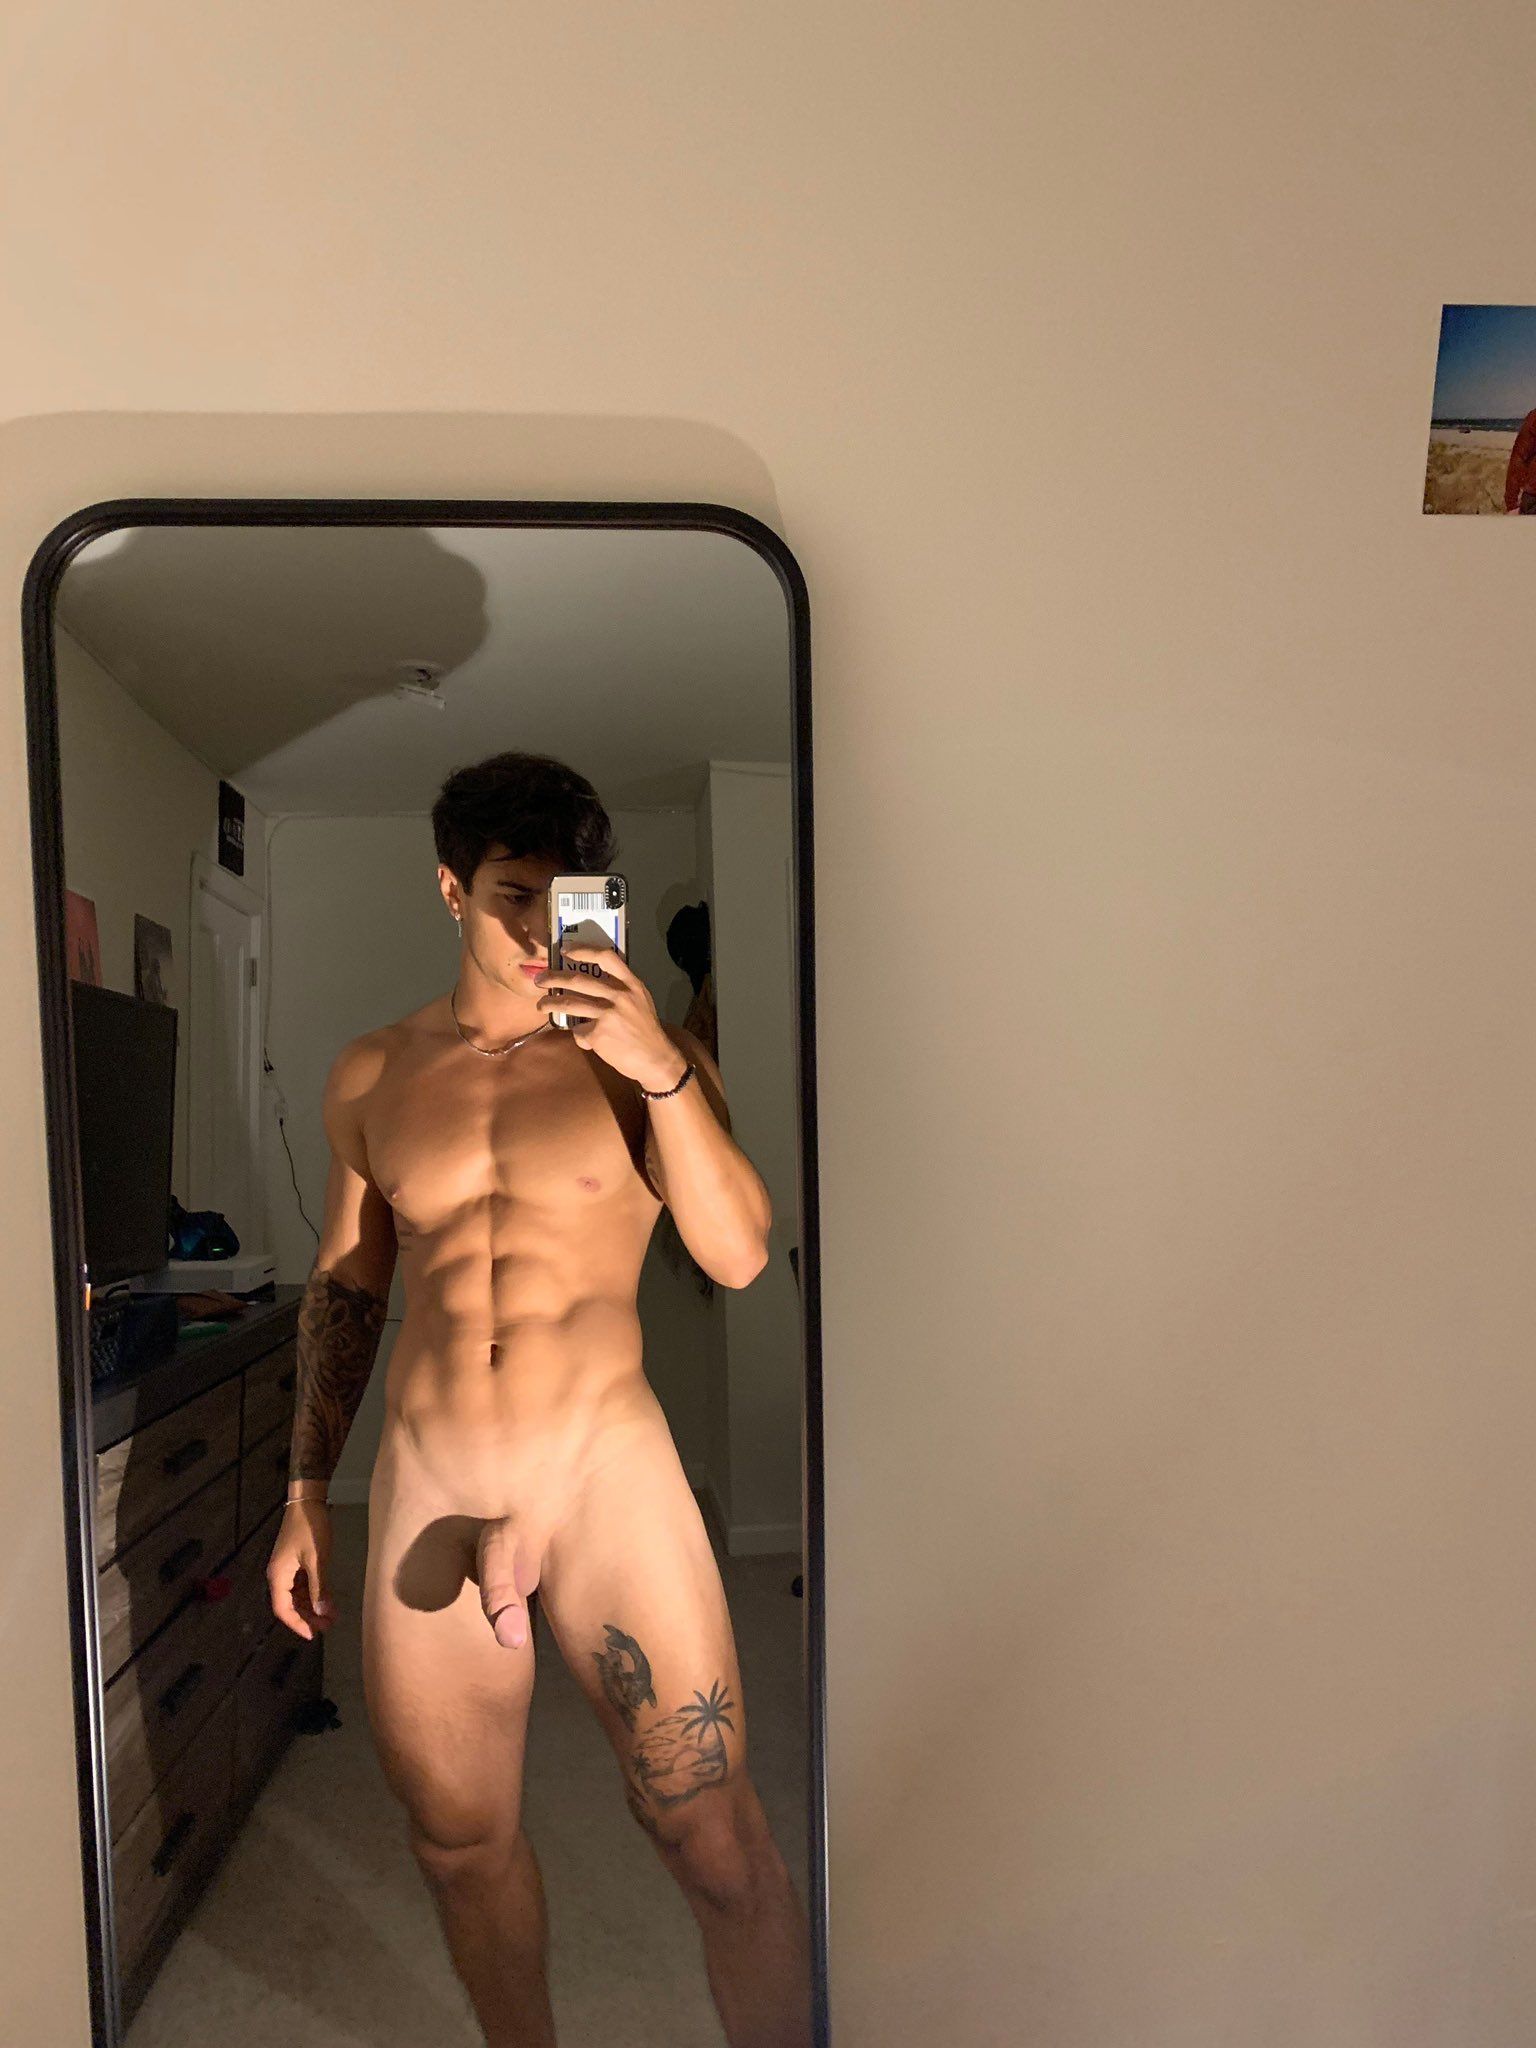 Evan lamicella onlyfans nudes